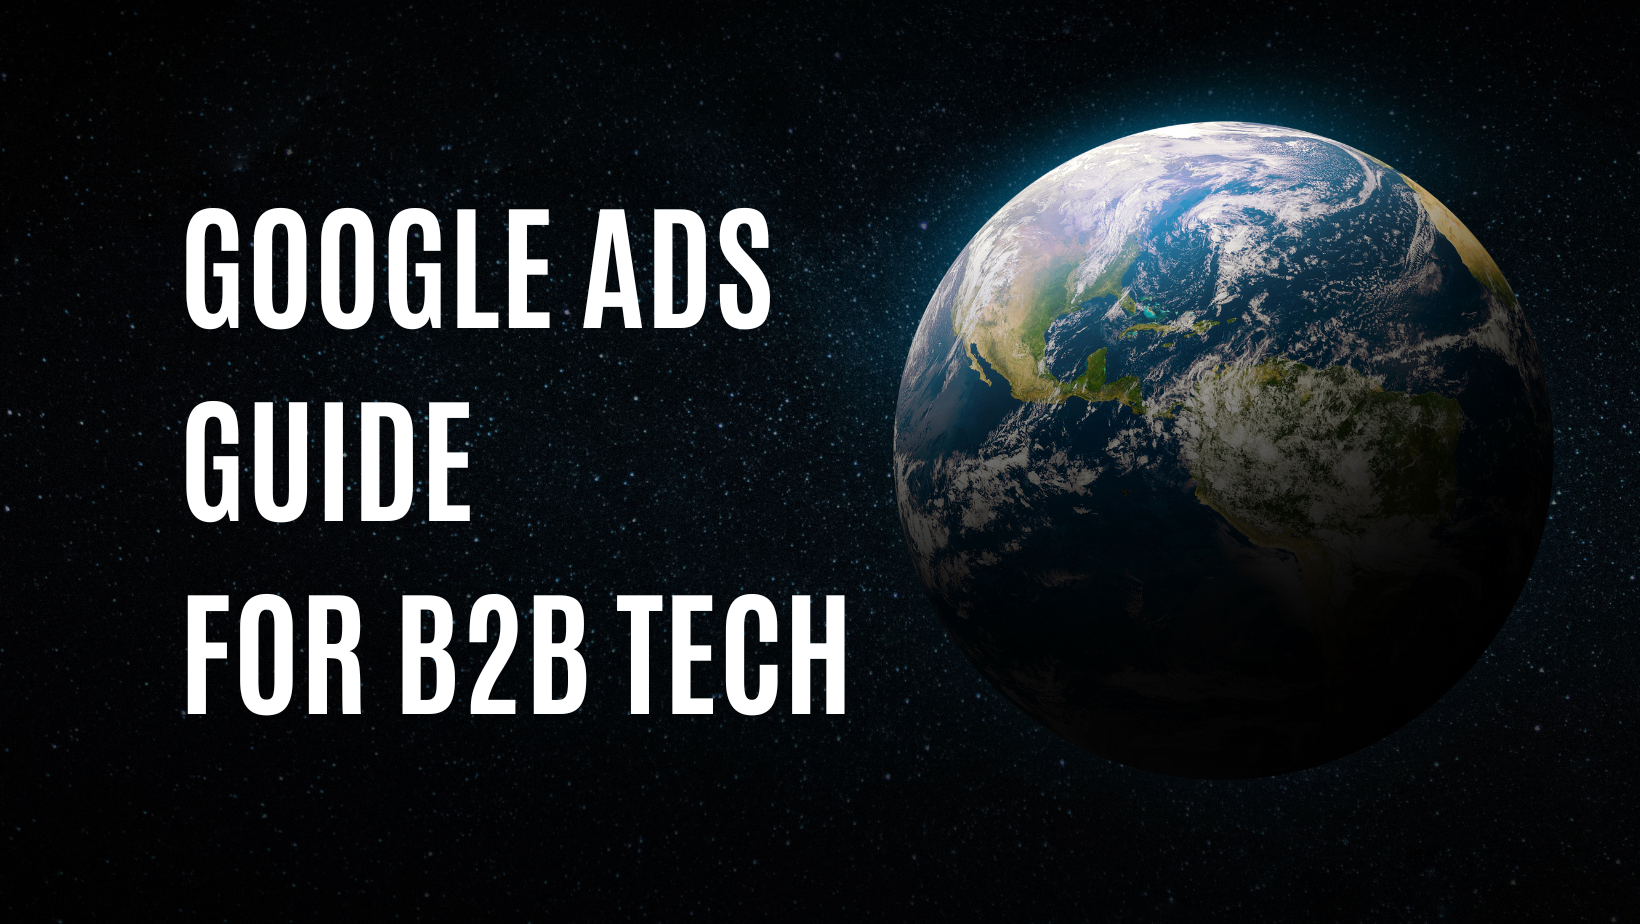 Google ads guide for b2b tech by max sinclair